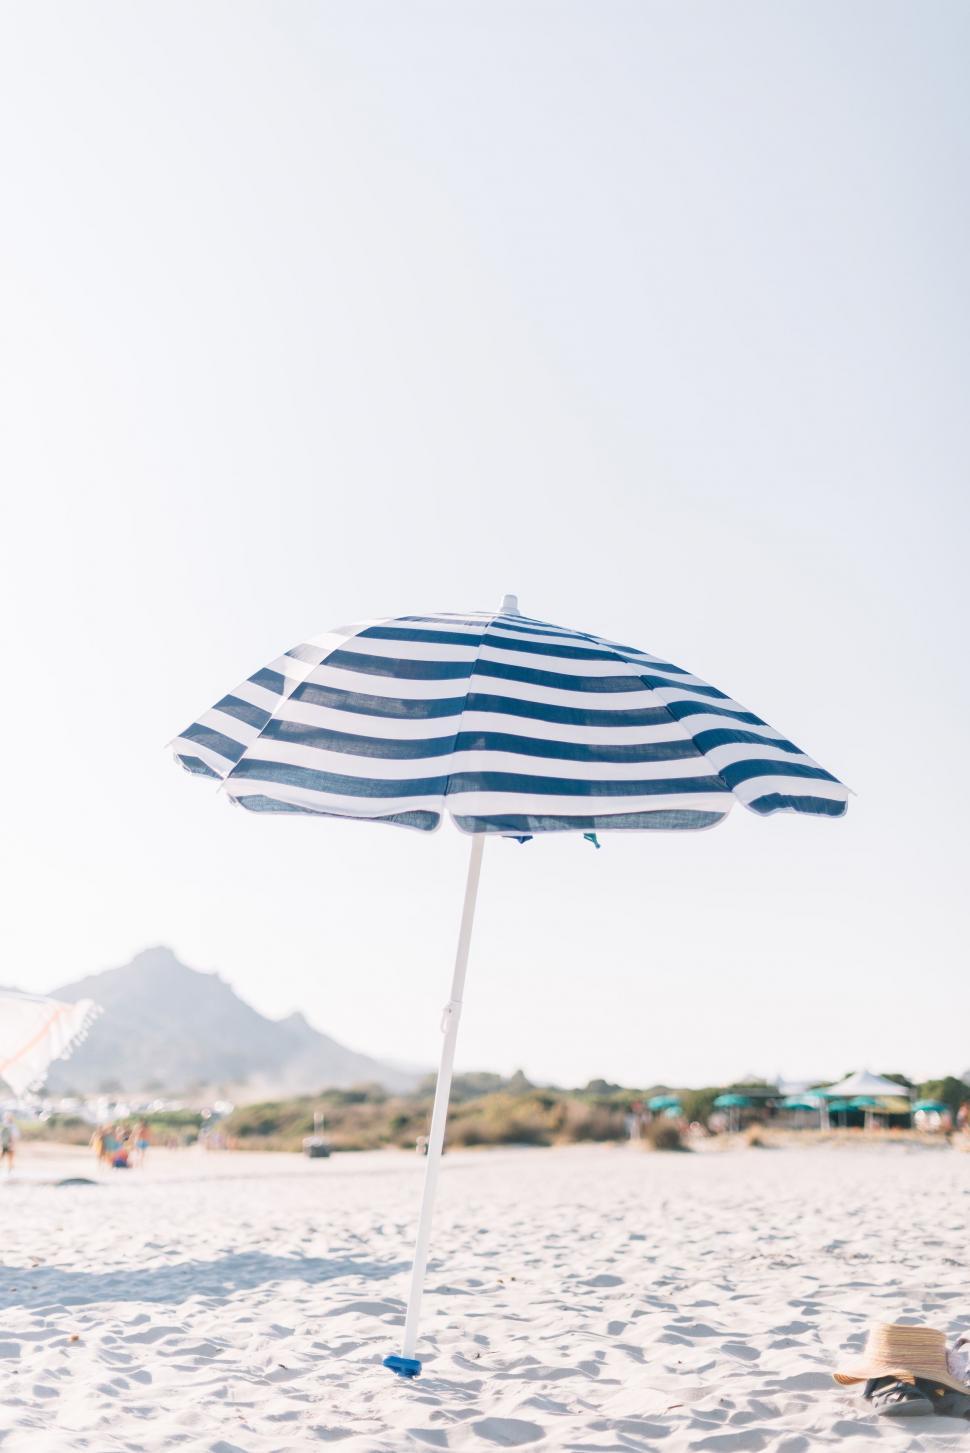 Free Image of Blue and White Umbrella on Sandy Beach 